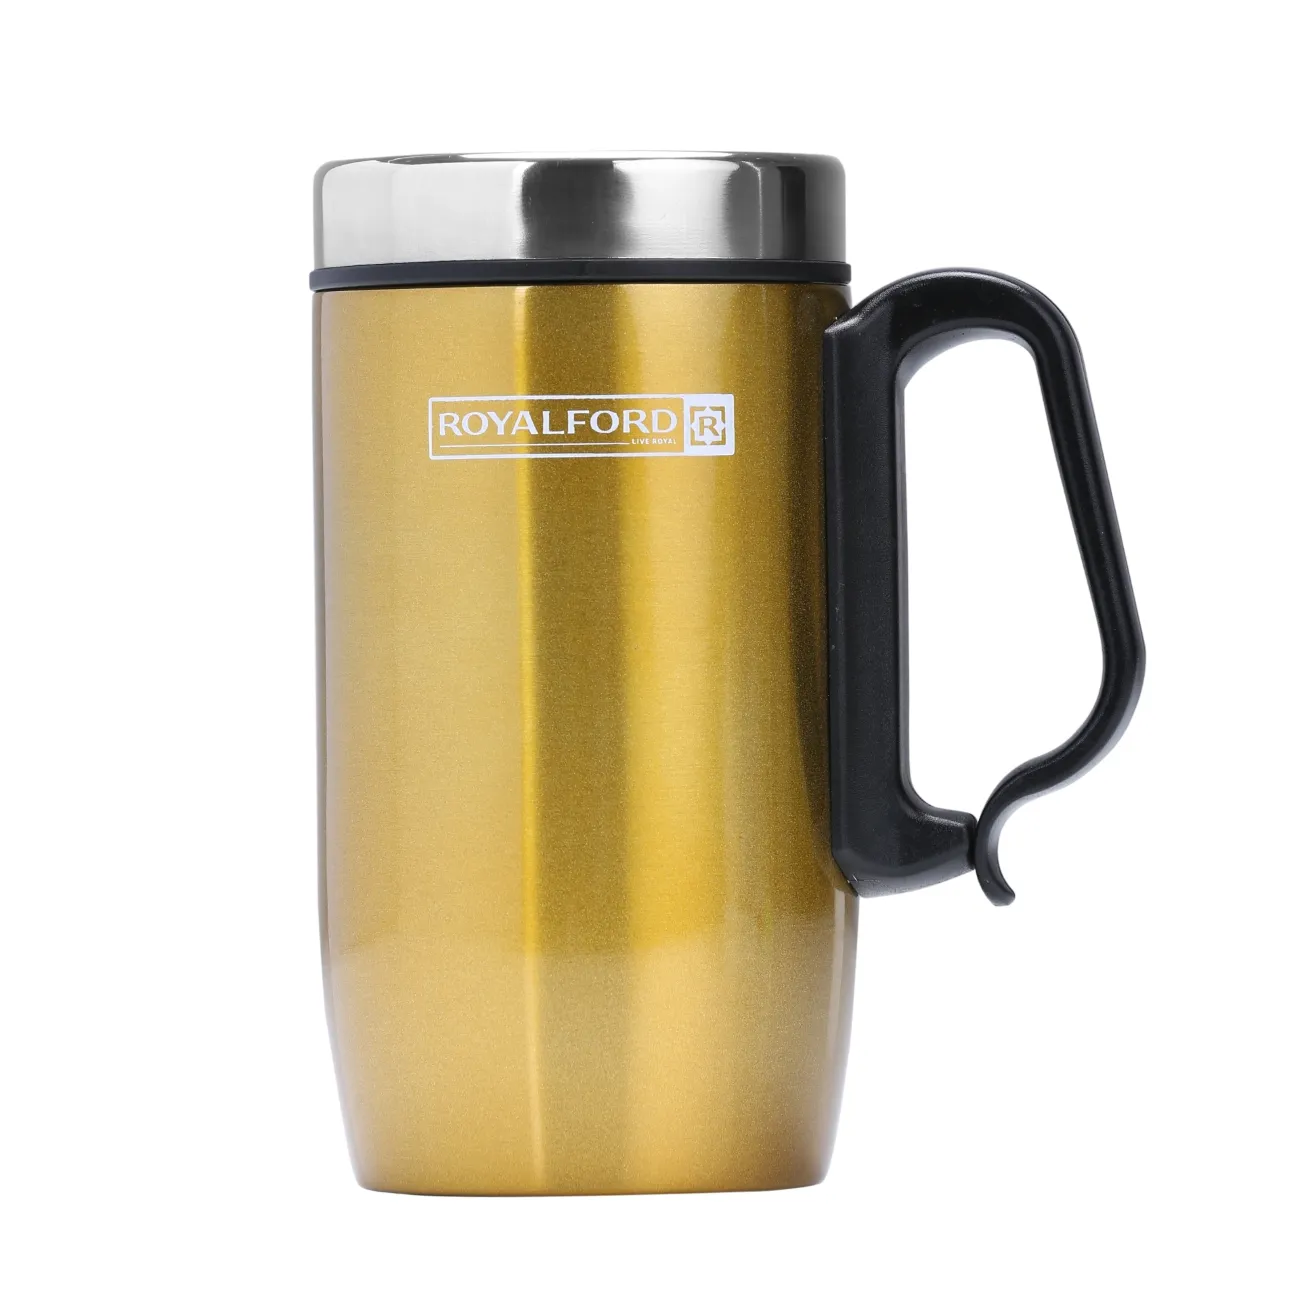 Royalford  RFU9038 280ml Coffee Mug - Double Wall, Stainless Steel, Hot & Cool, Vacuum Insulation, Leak-Resistant - Preserves Flavor and Freshness